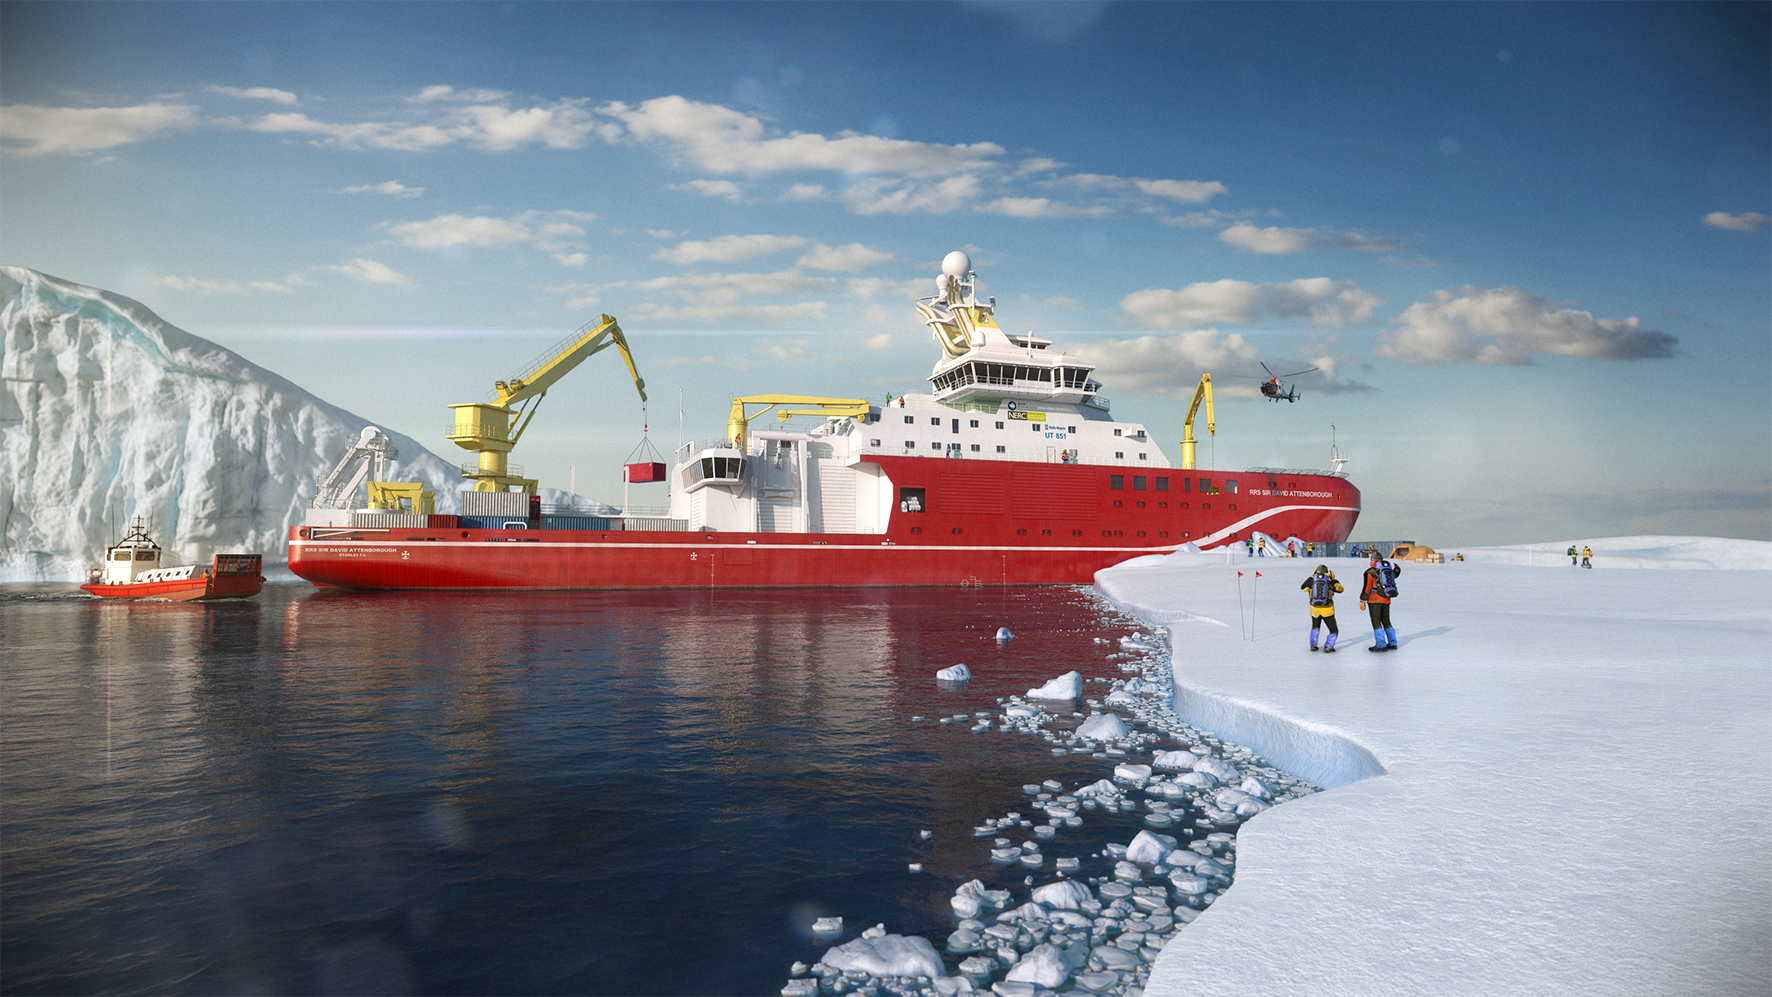 Artist's impression of RRS Sir David Attenborough which is due to go into service in 2019 (British Antarctic Survey/Rolls Royce)